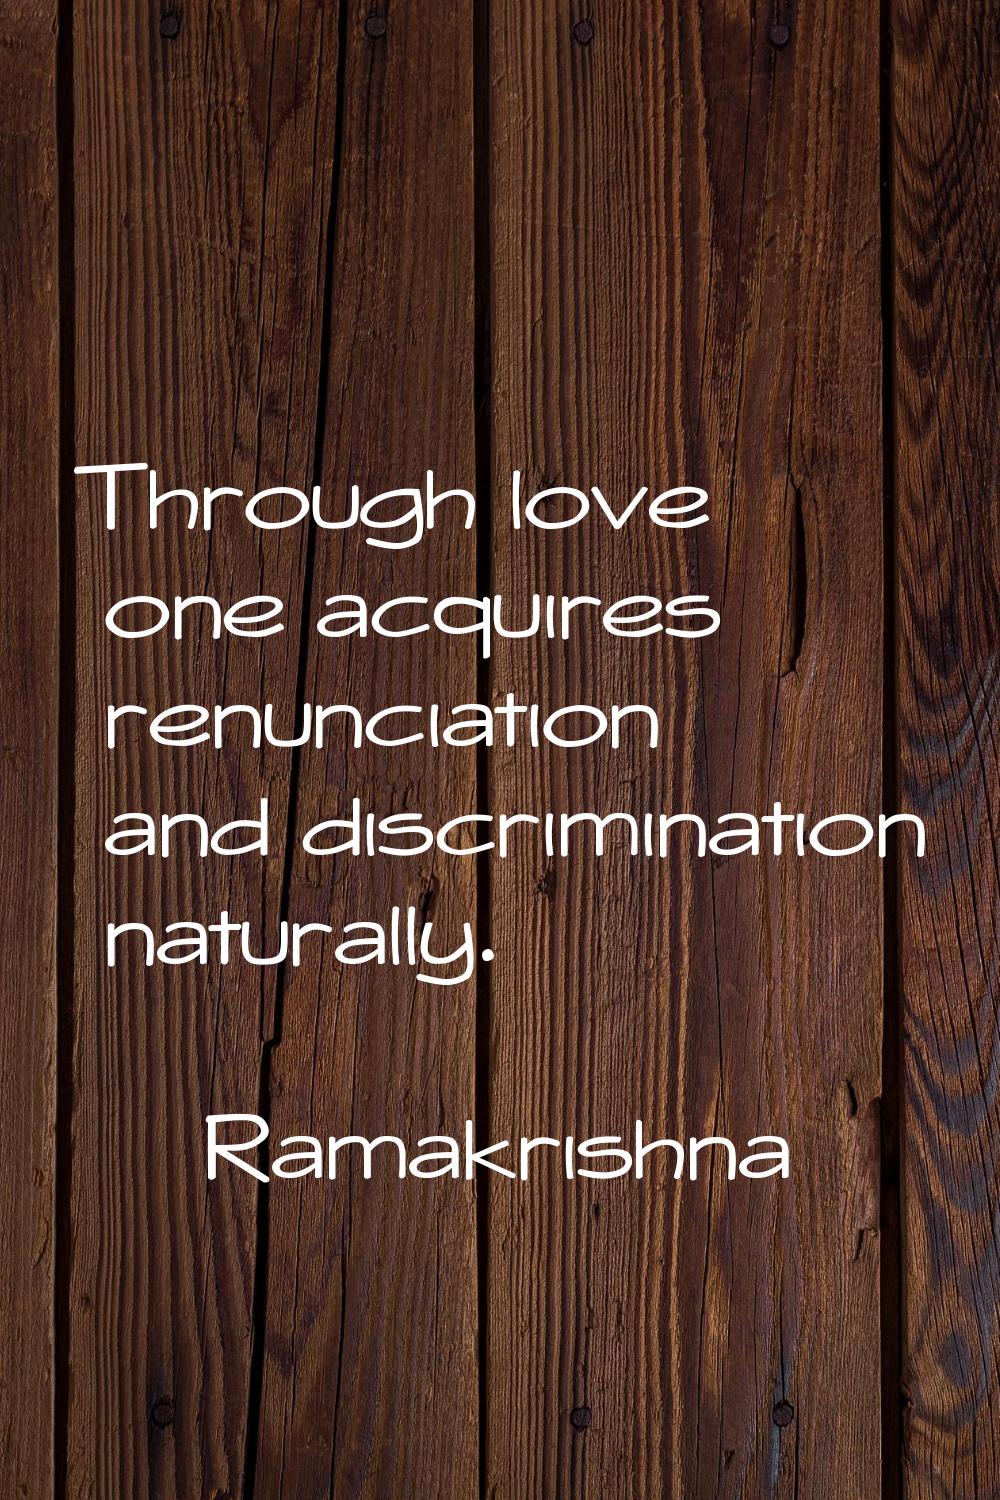 Through love one acquires renunciation and discrimination naturally.